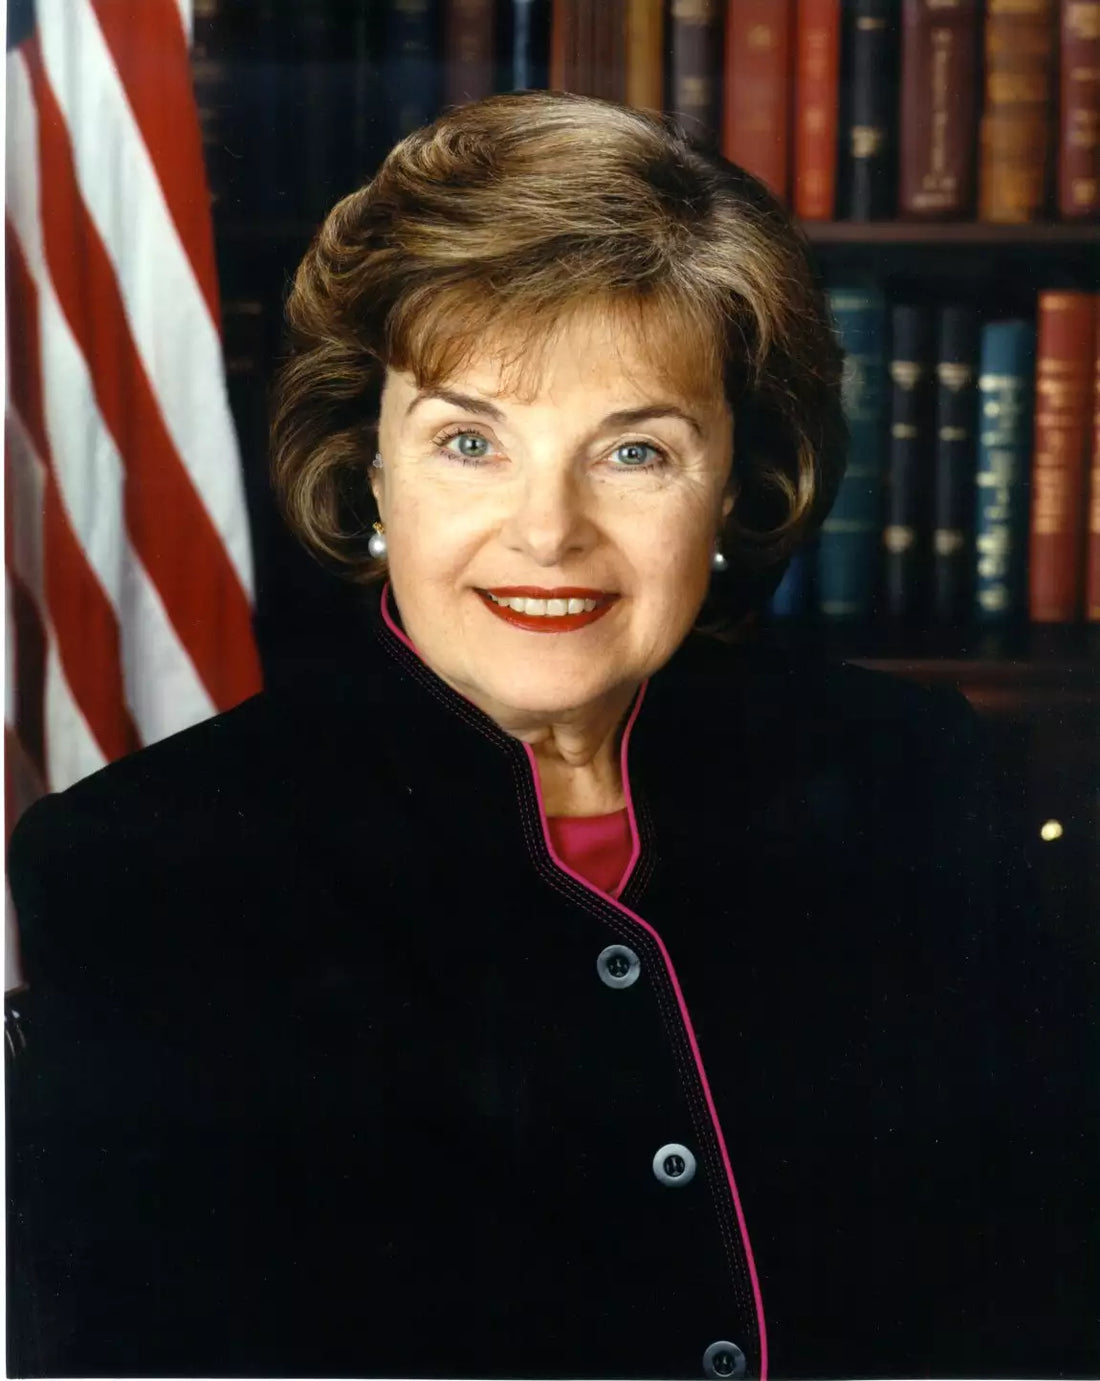 The Casket and Funeral of Dianne Feinstein